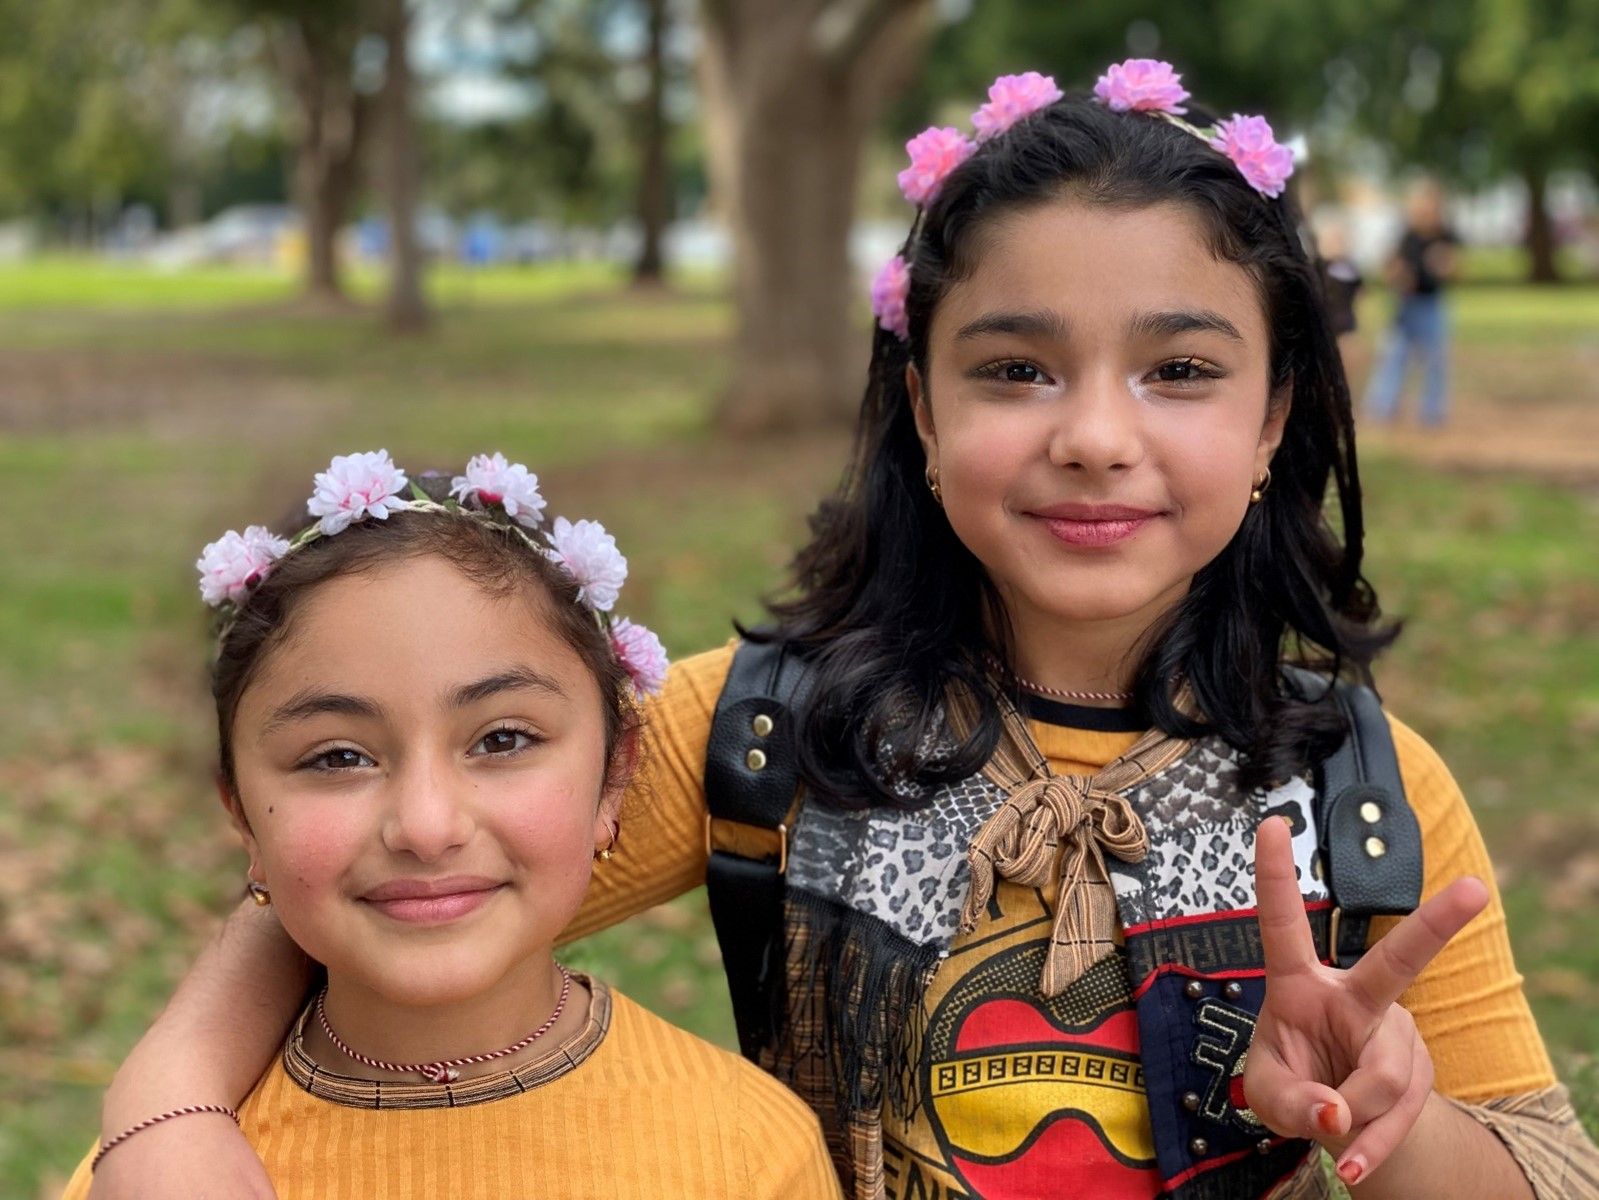 Two young girls wearing flower crowns are posing for a picture in a park.